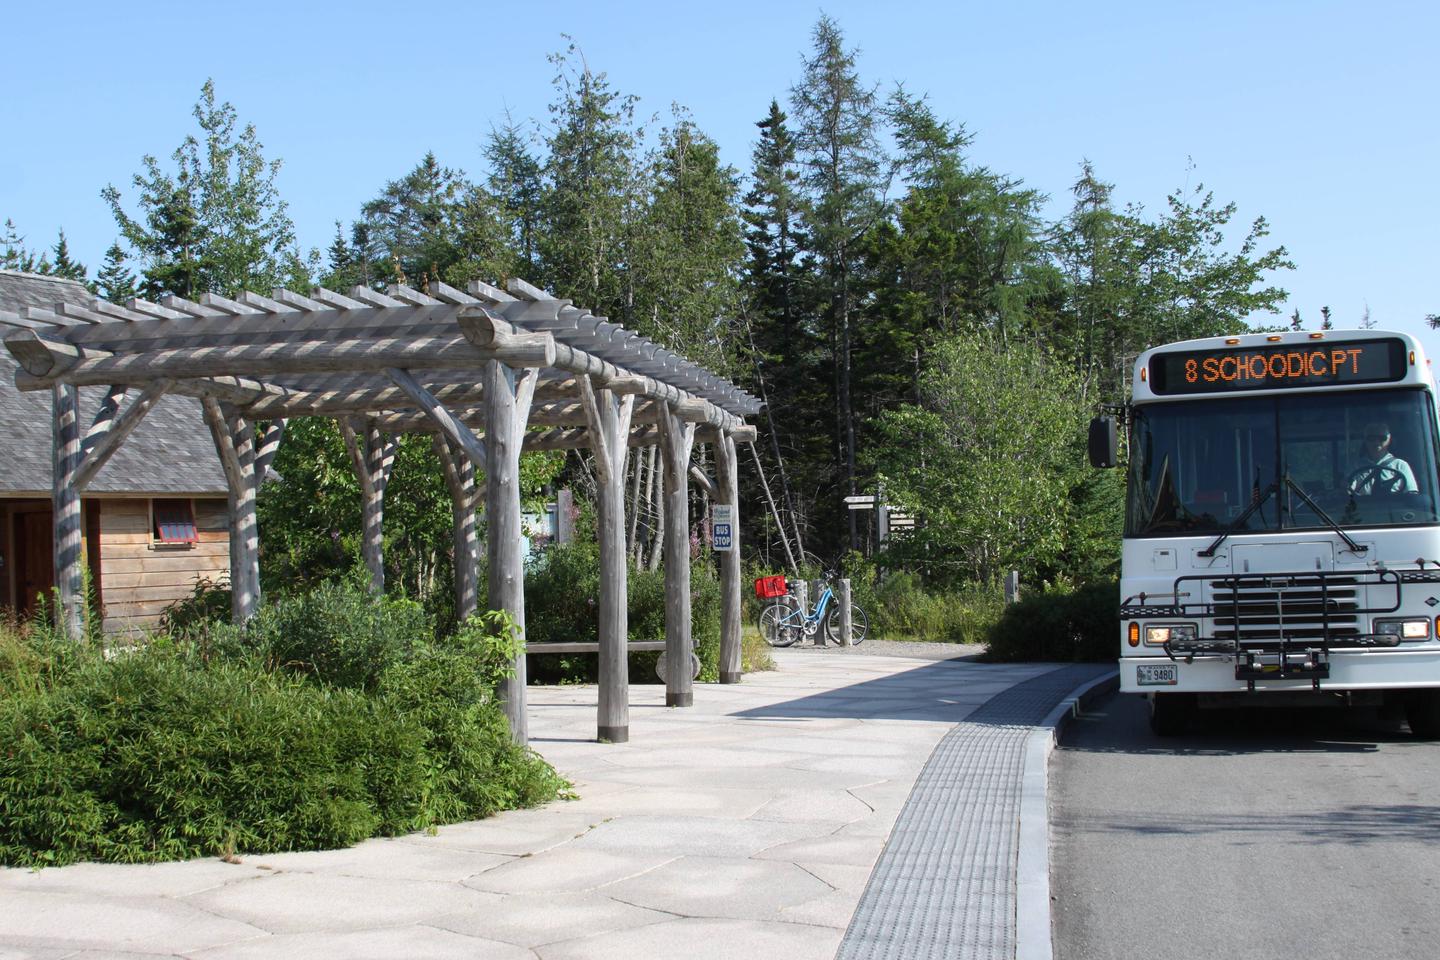 Shuttle bus waiting at a bus stop.Island Explorer Bus Stop at Schoodic Woods